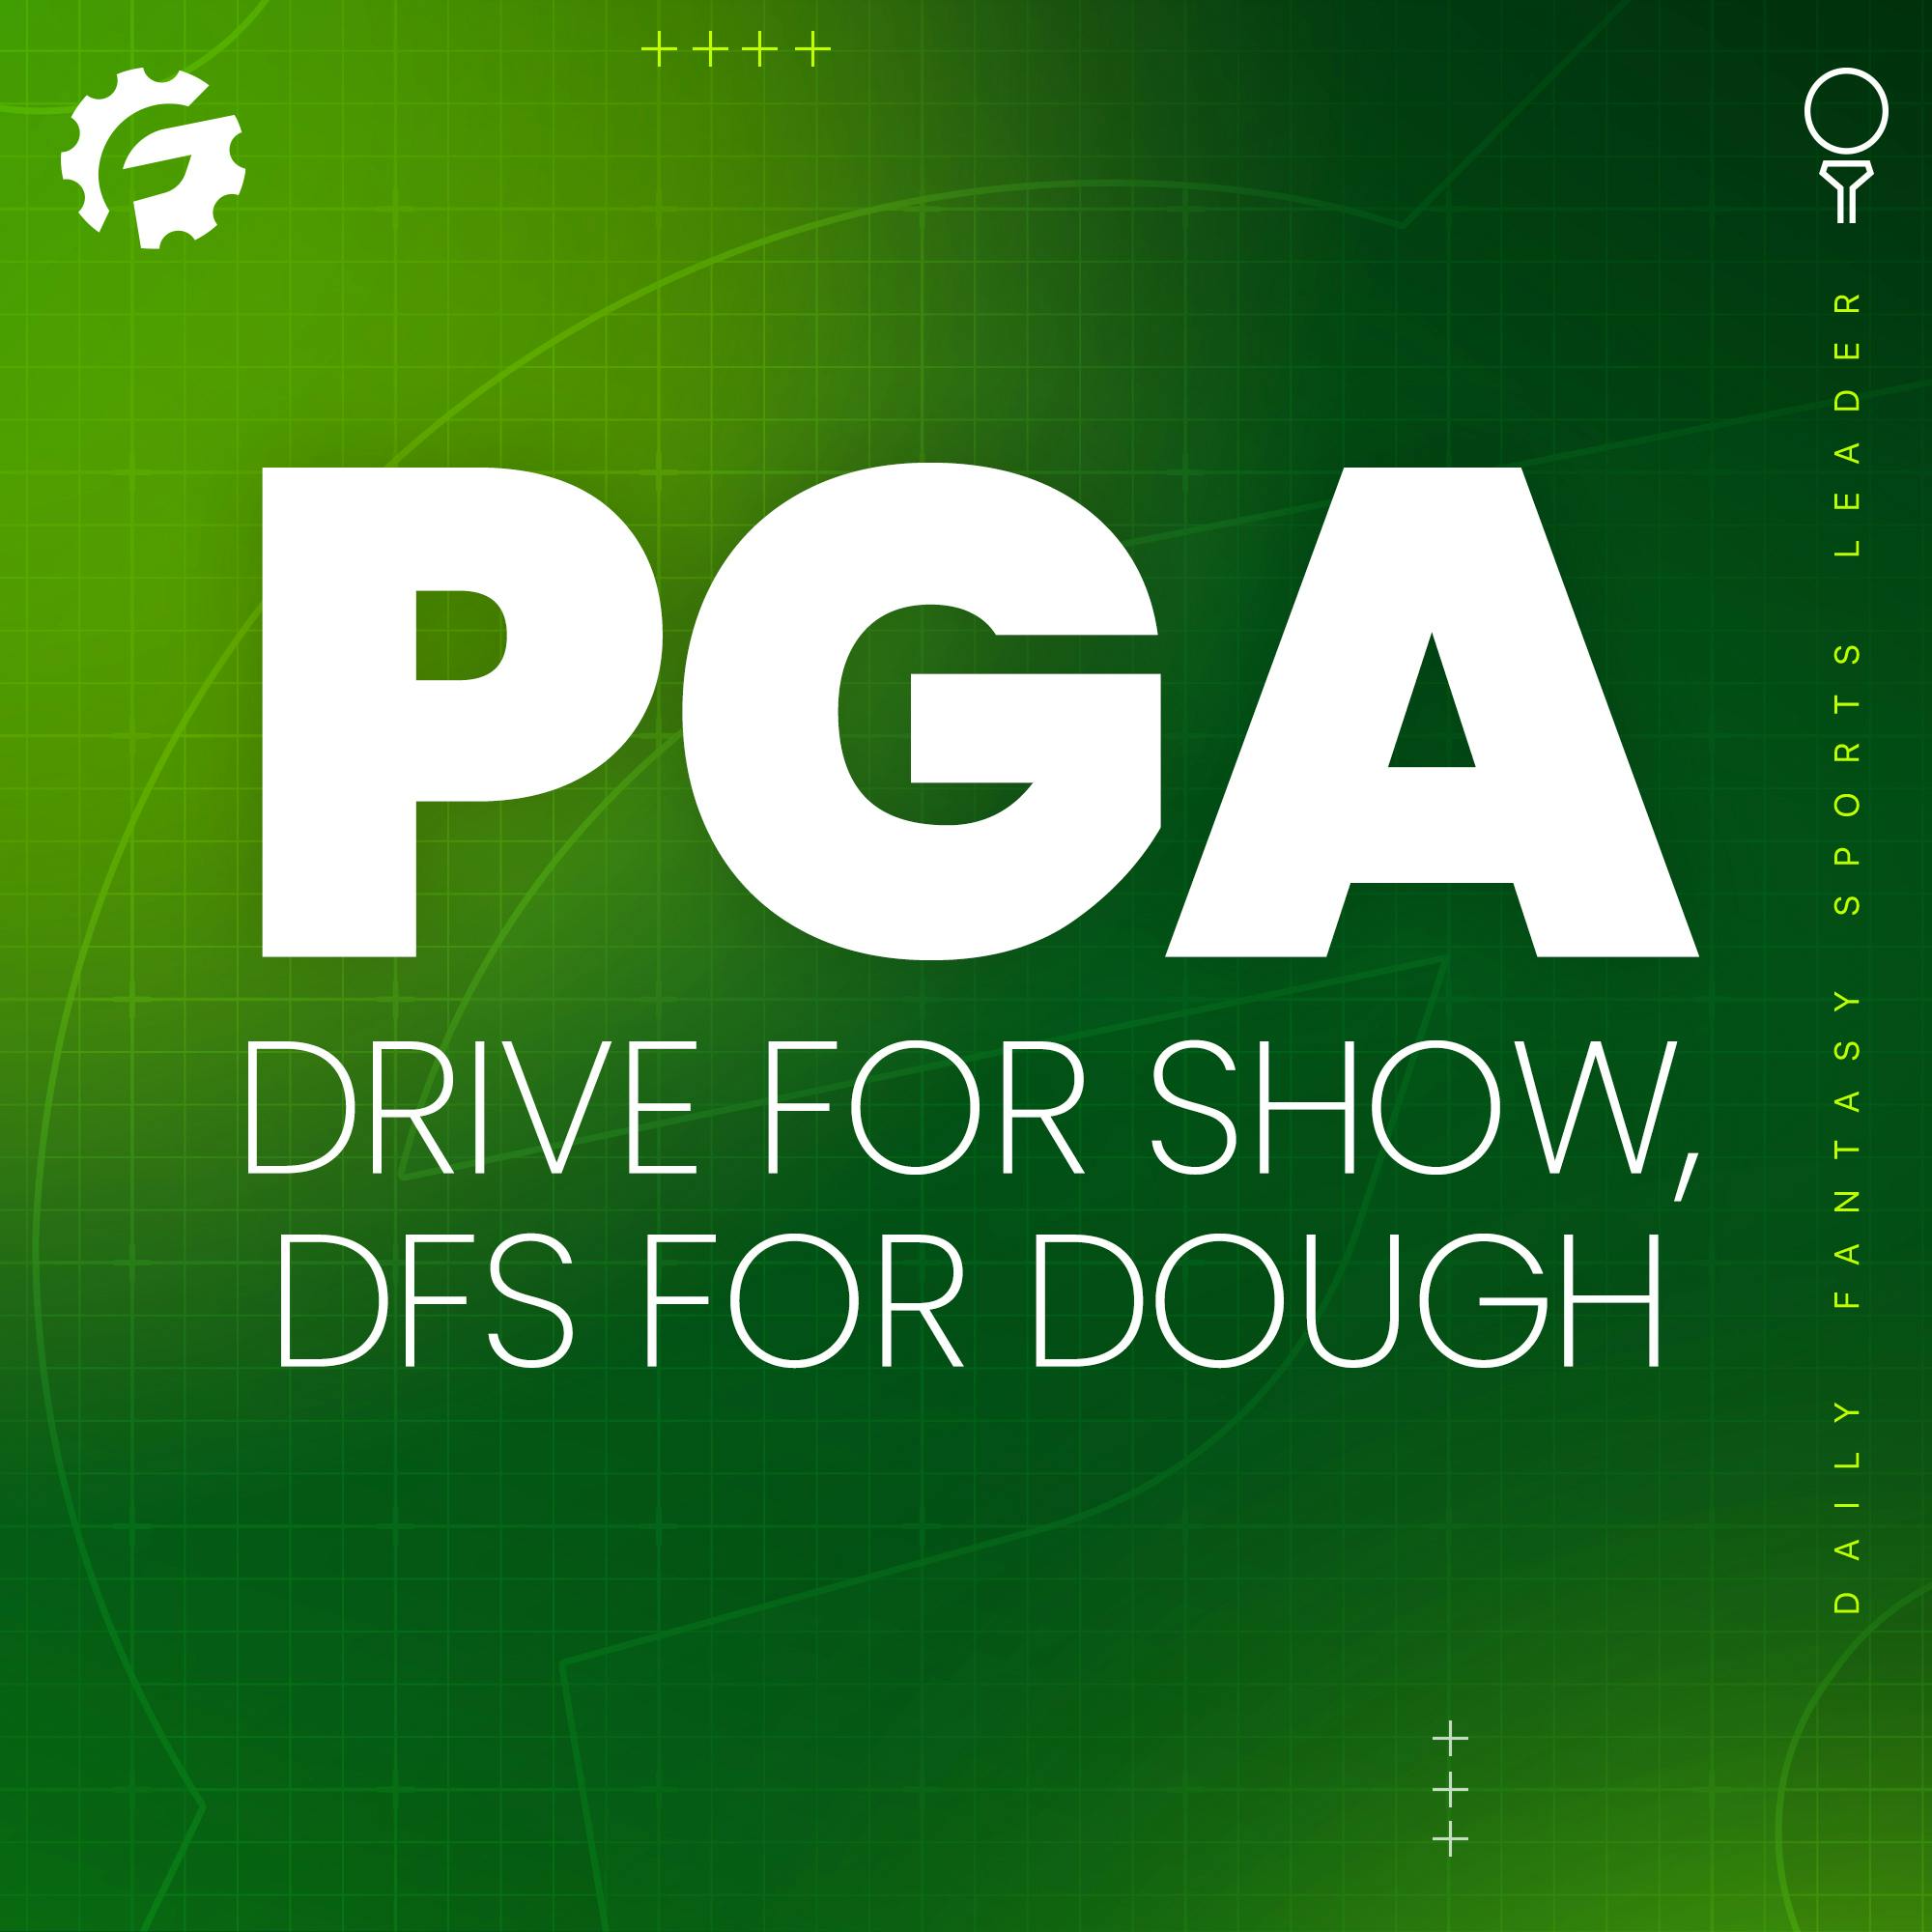 Drive For Show, DFS For Dough: WGC Dell Technologies Match Play